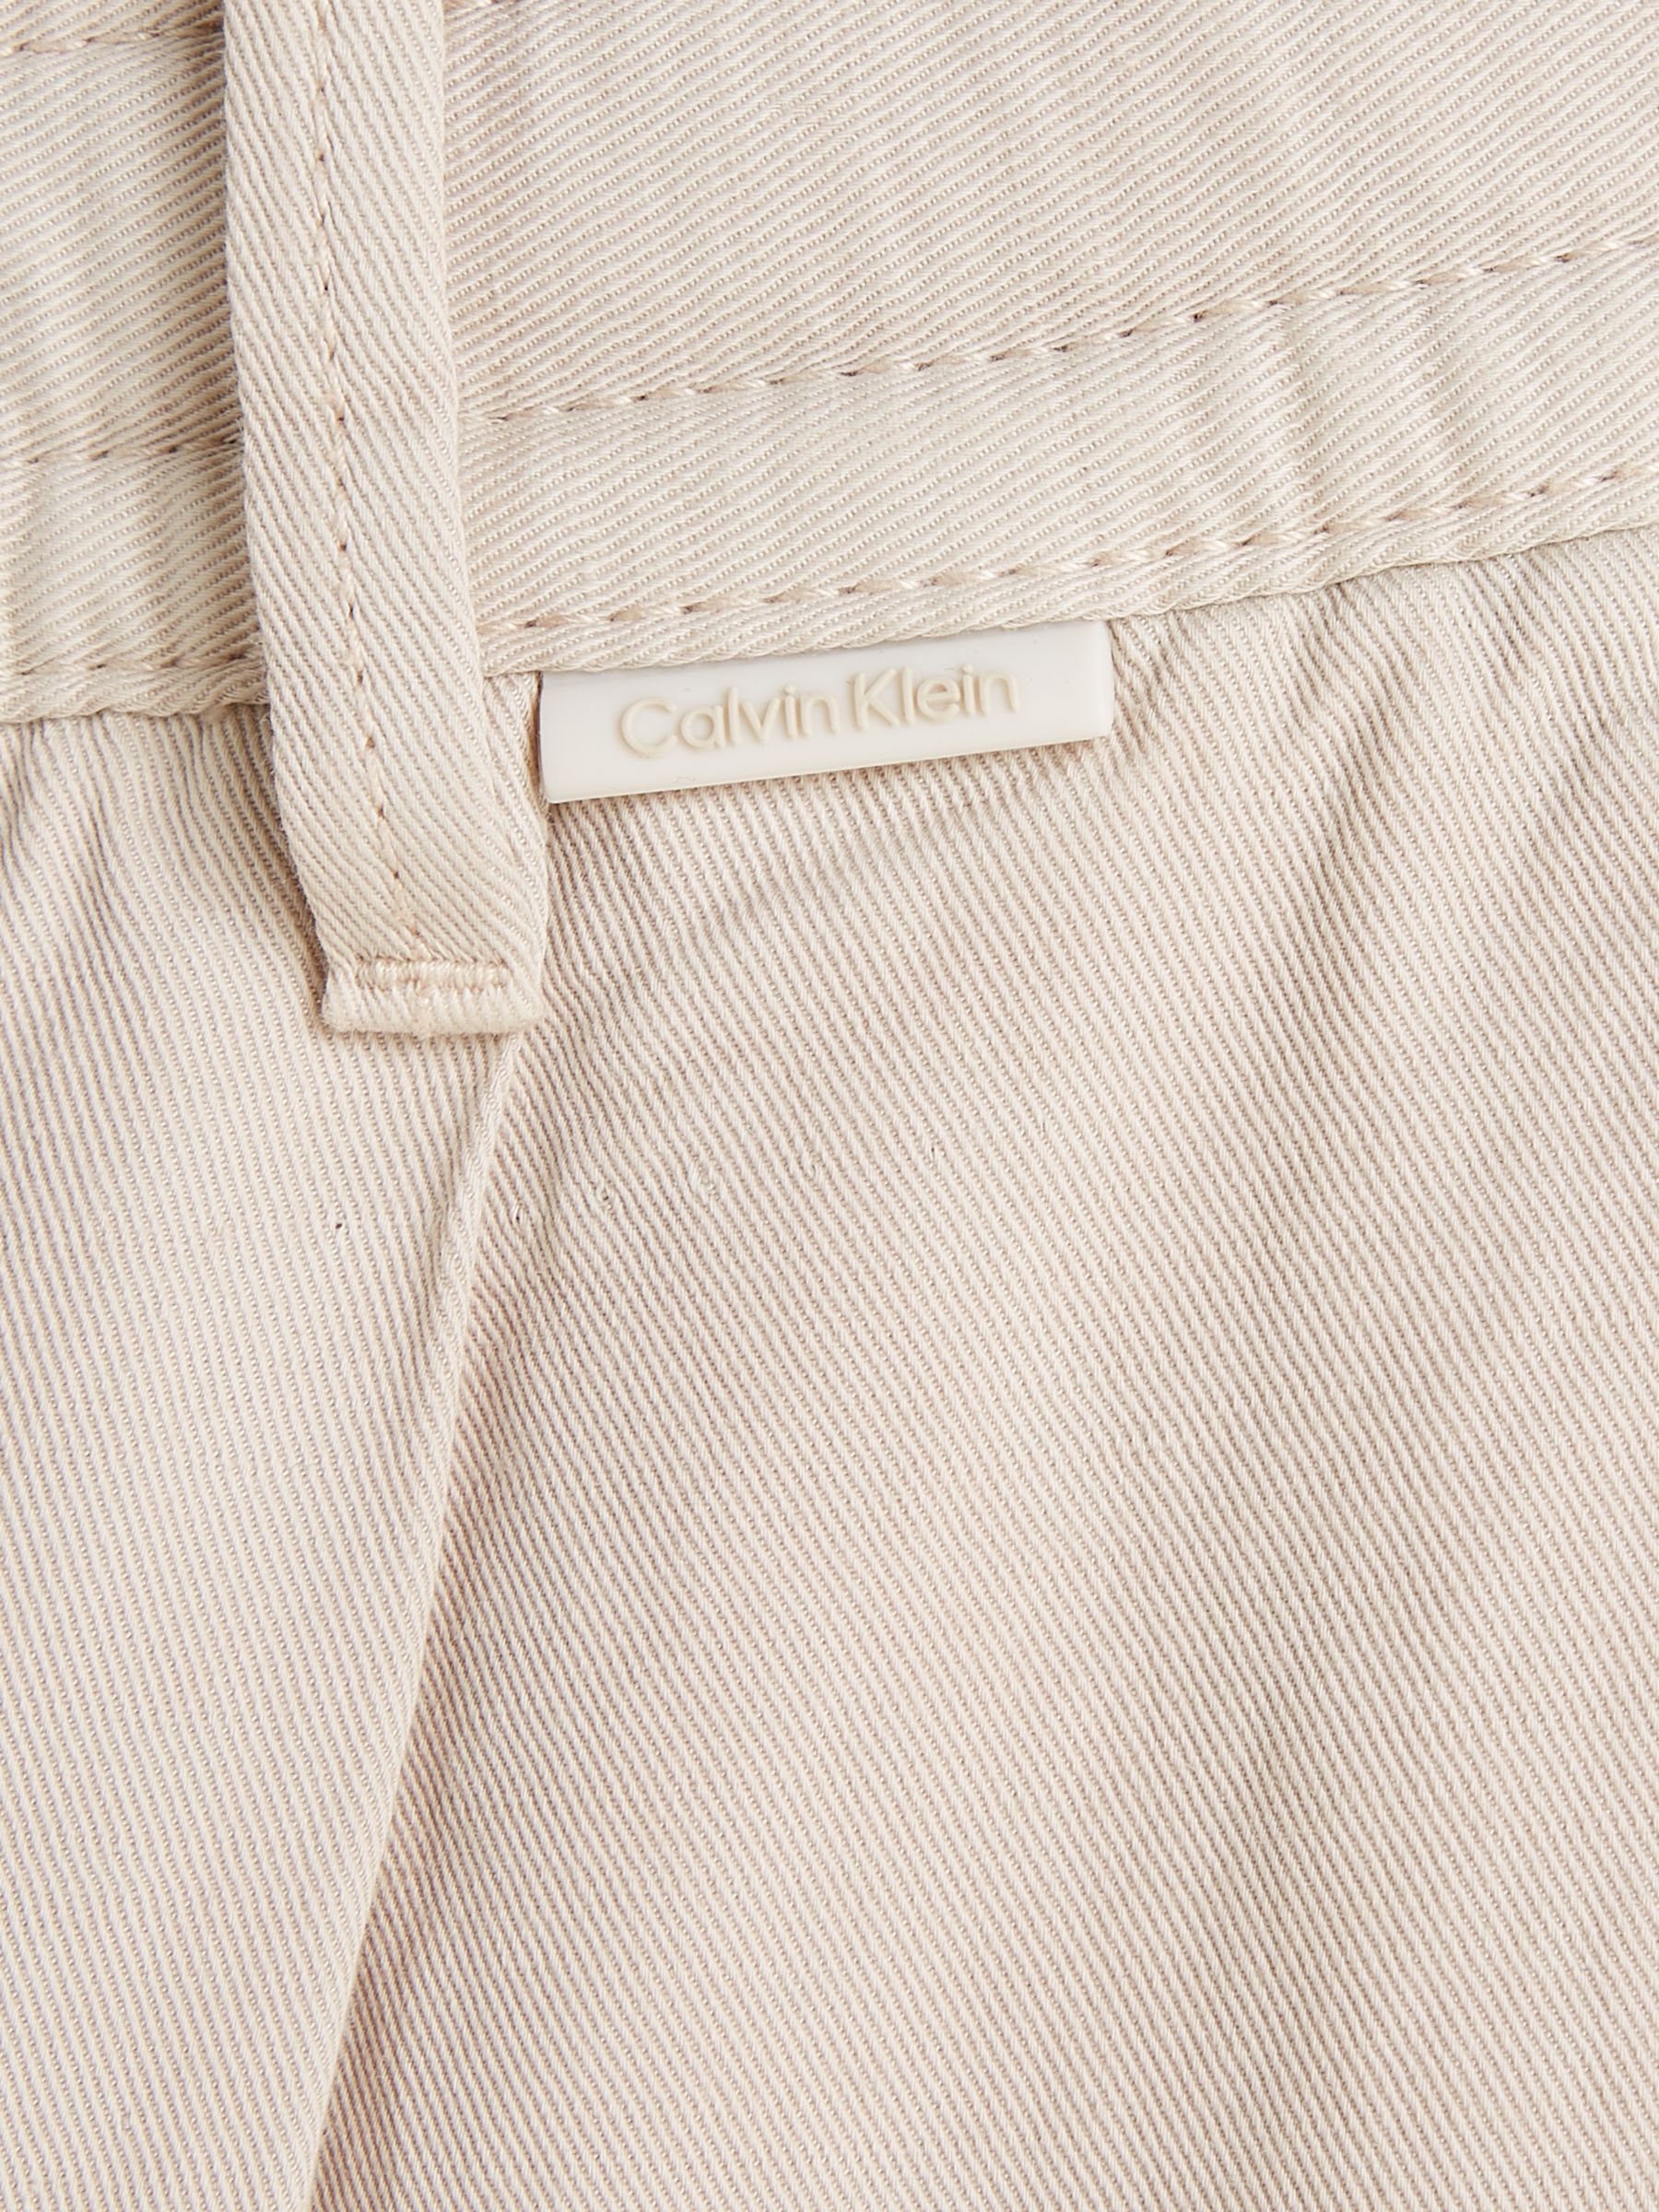 Calvin Klein Slim Fit Tapered Trousers, Stony Beige at John Lewis ...